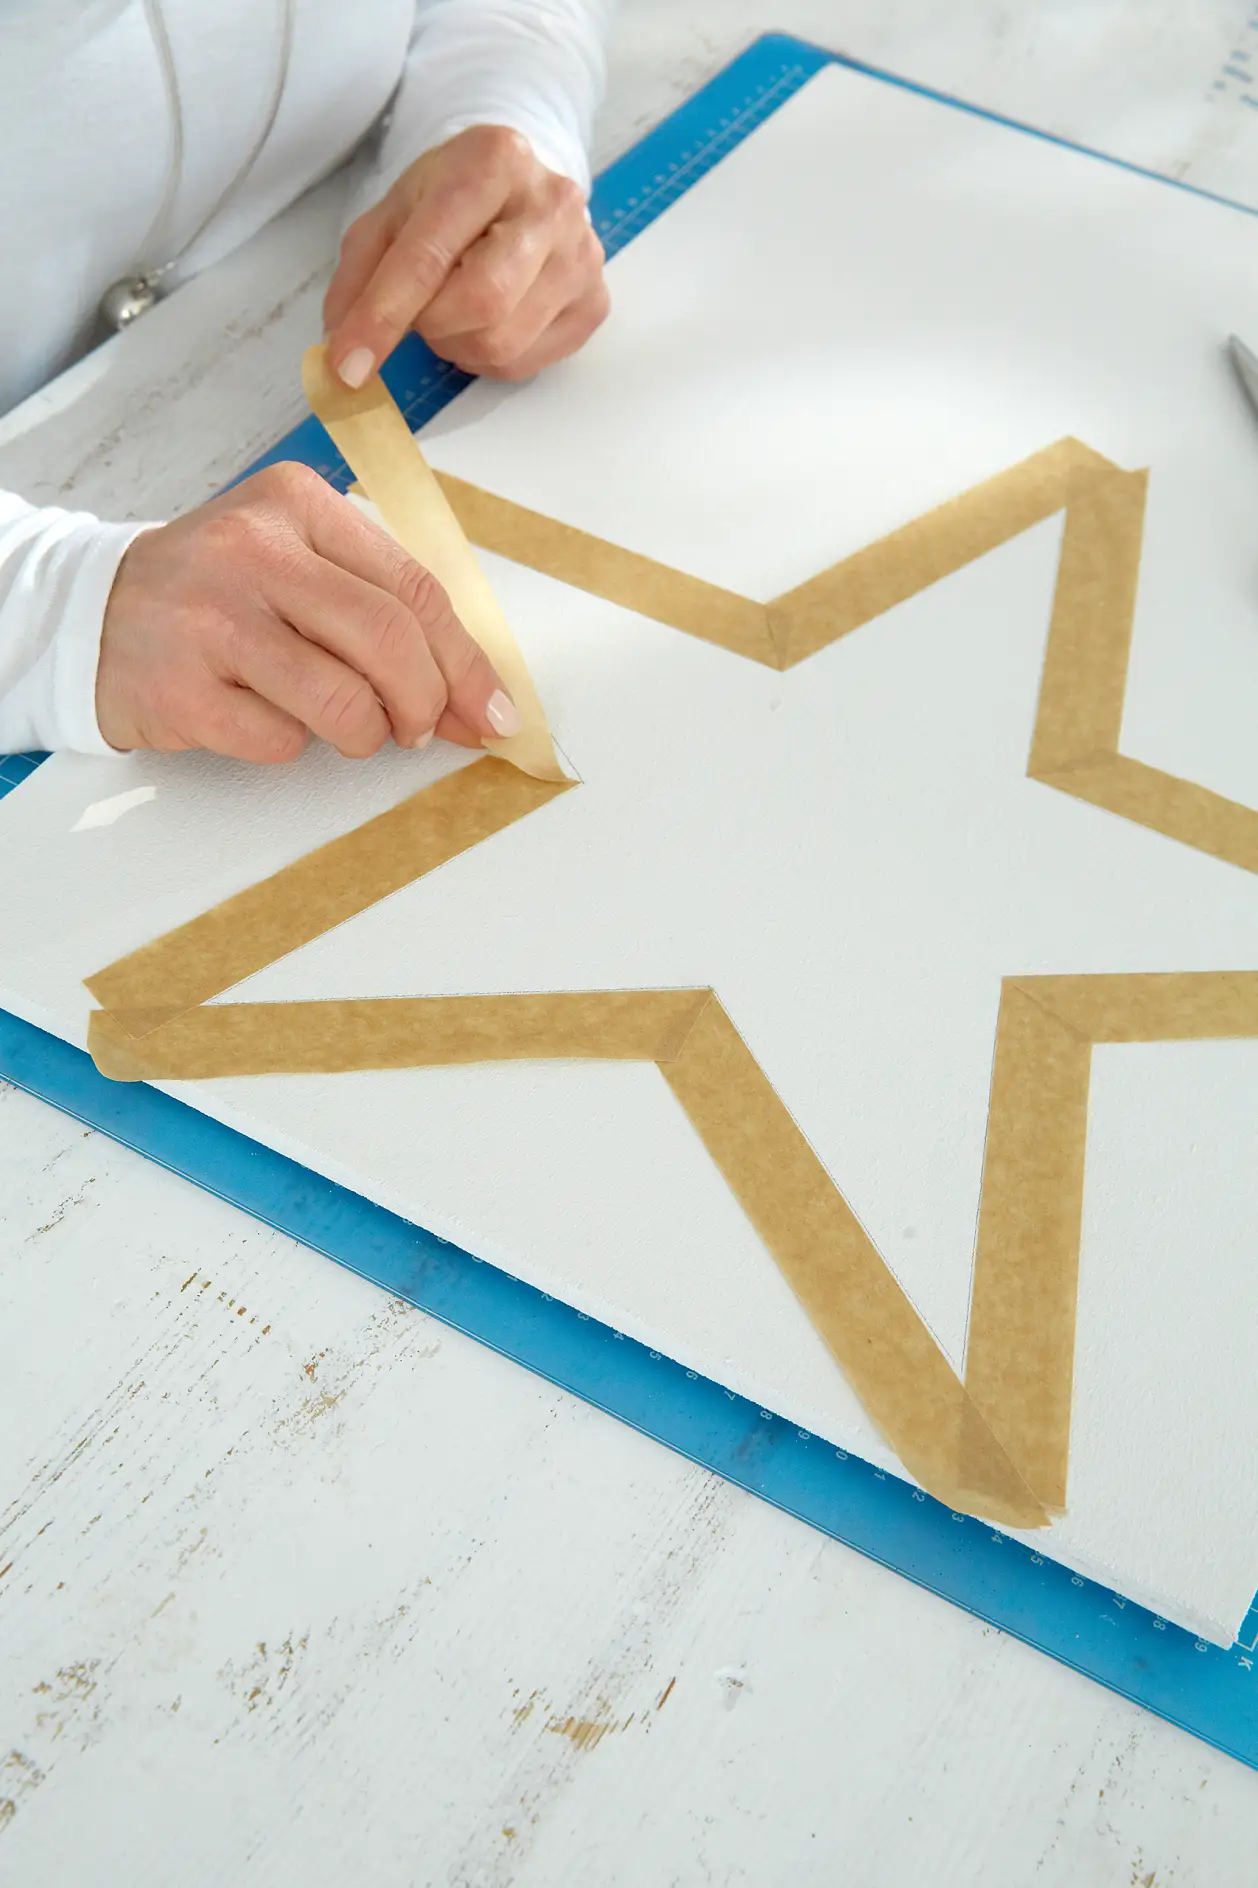 Cover the star with masking tape